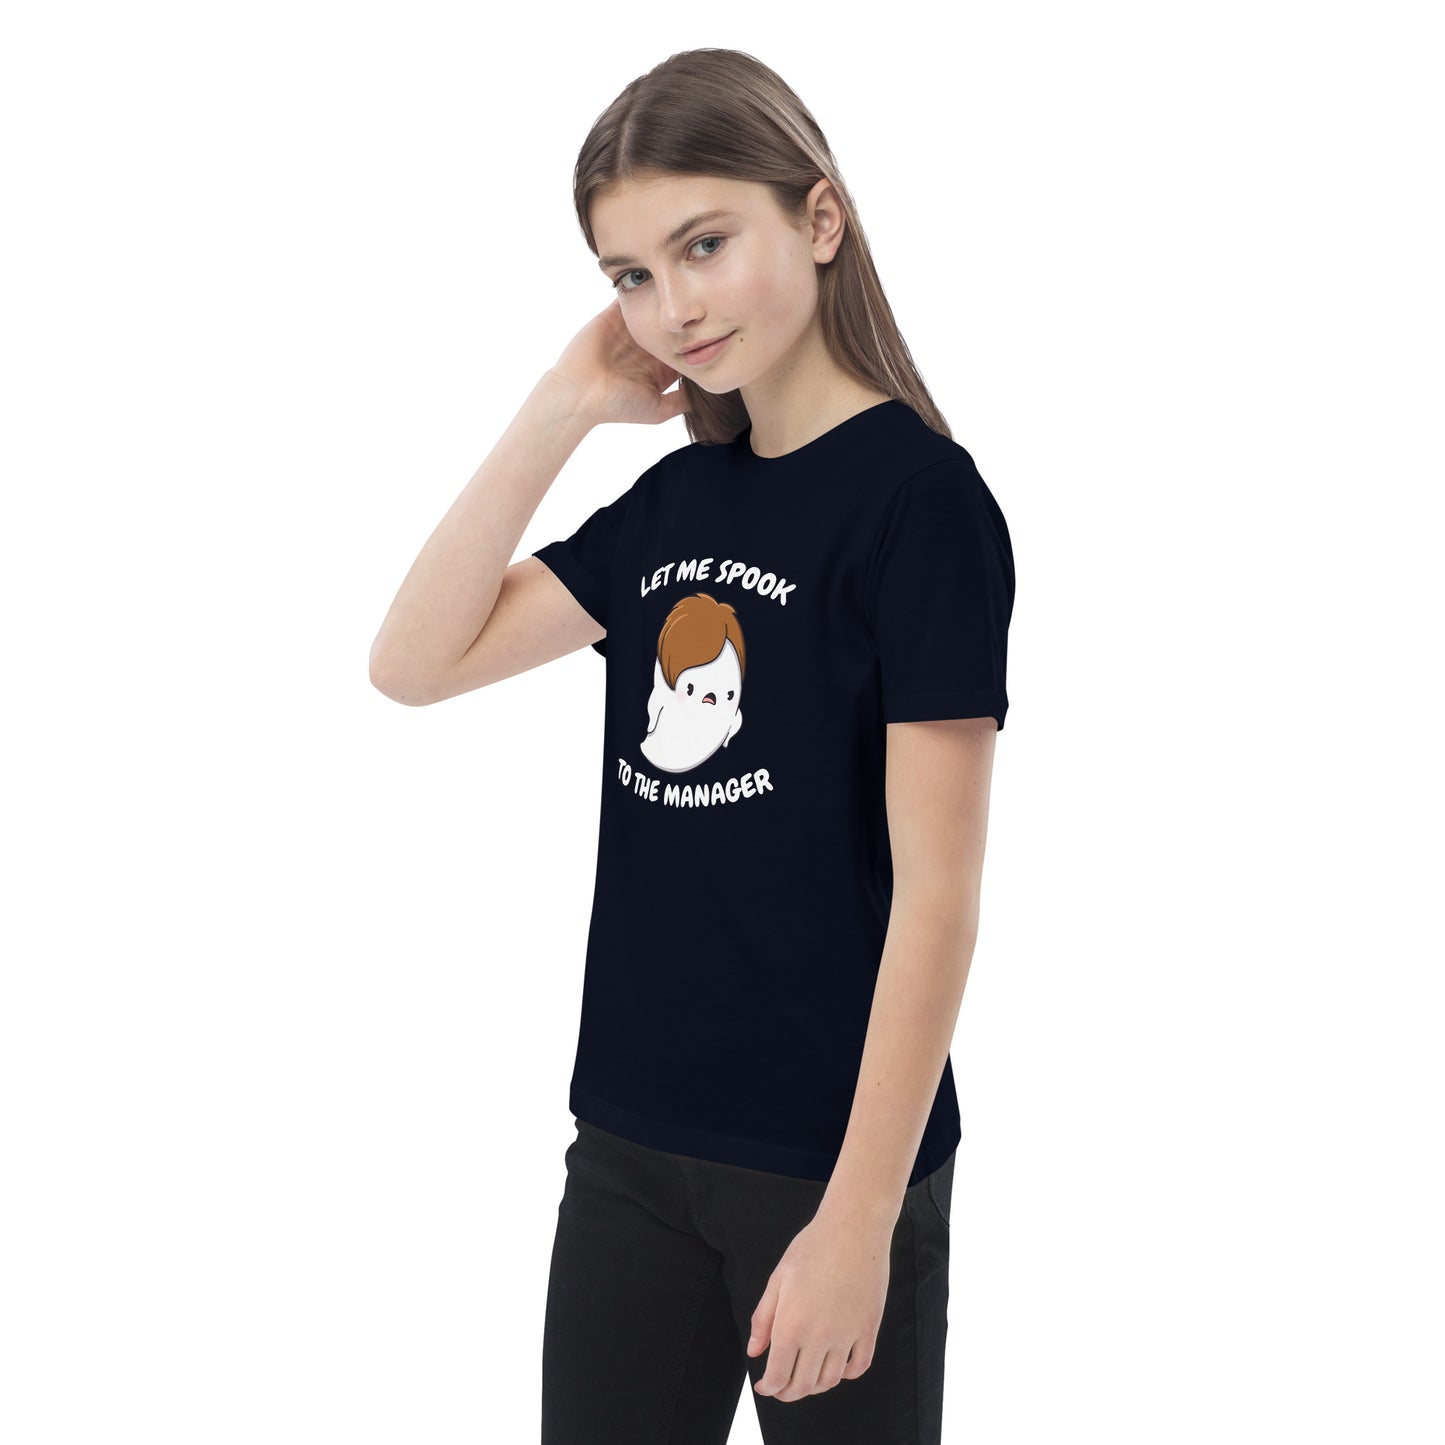 Let me spook to the manager - Organic cotton kids t-shirt